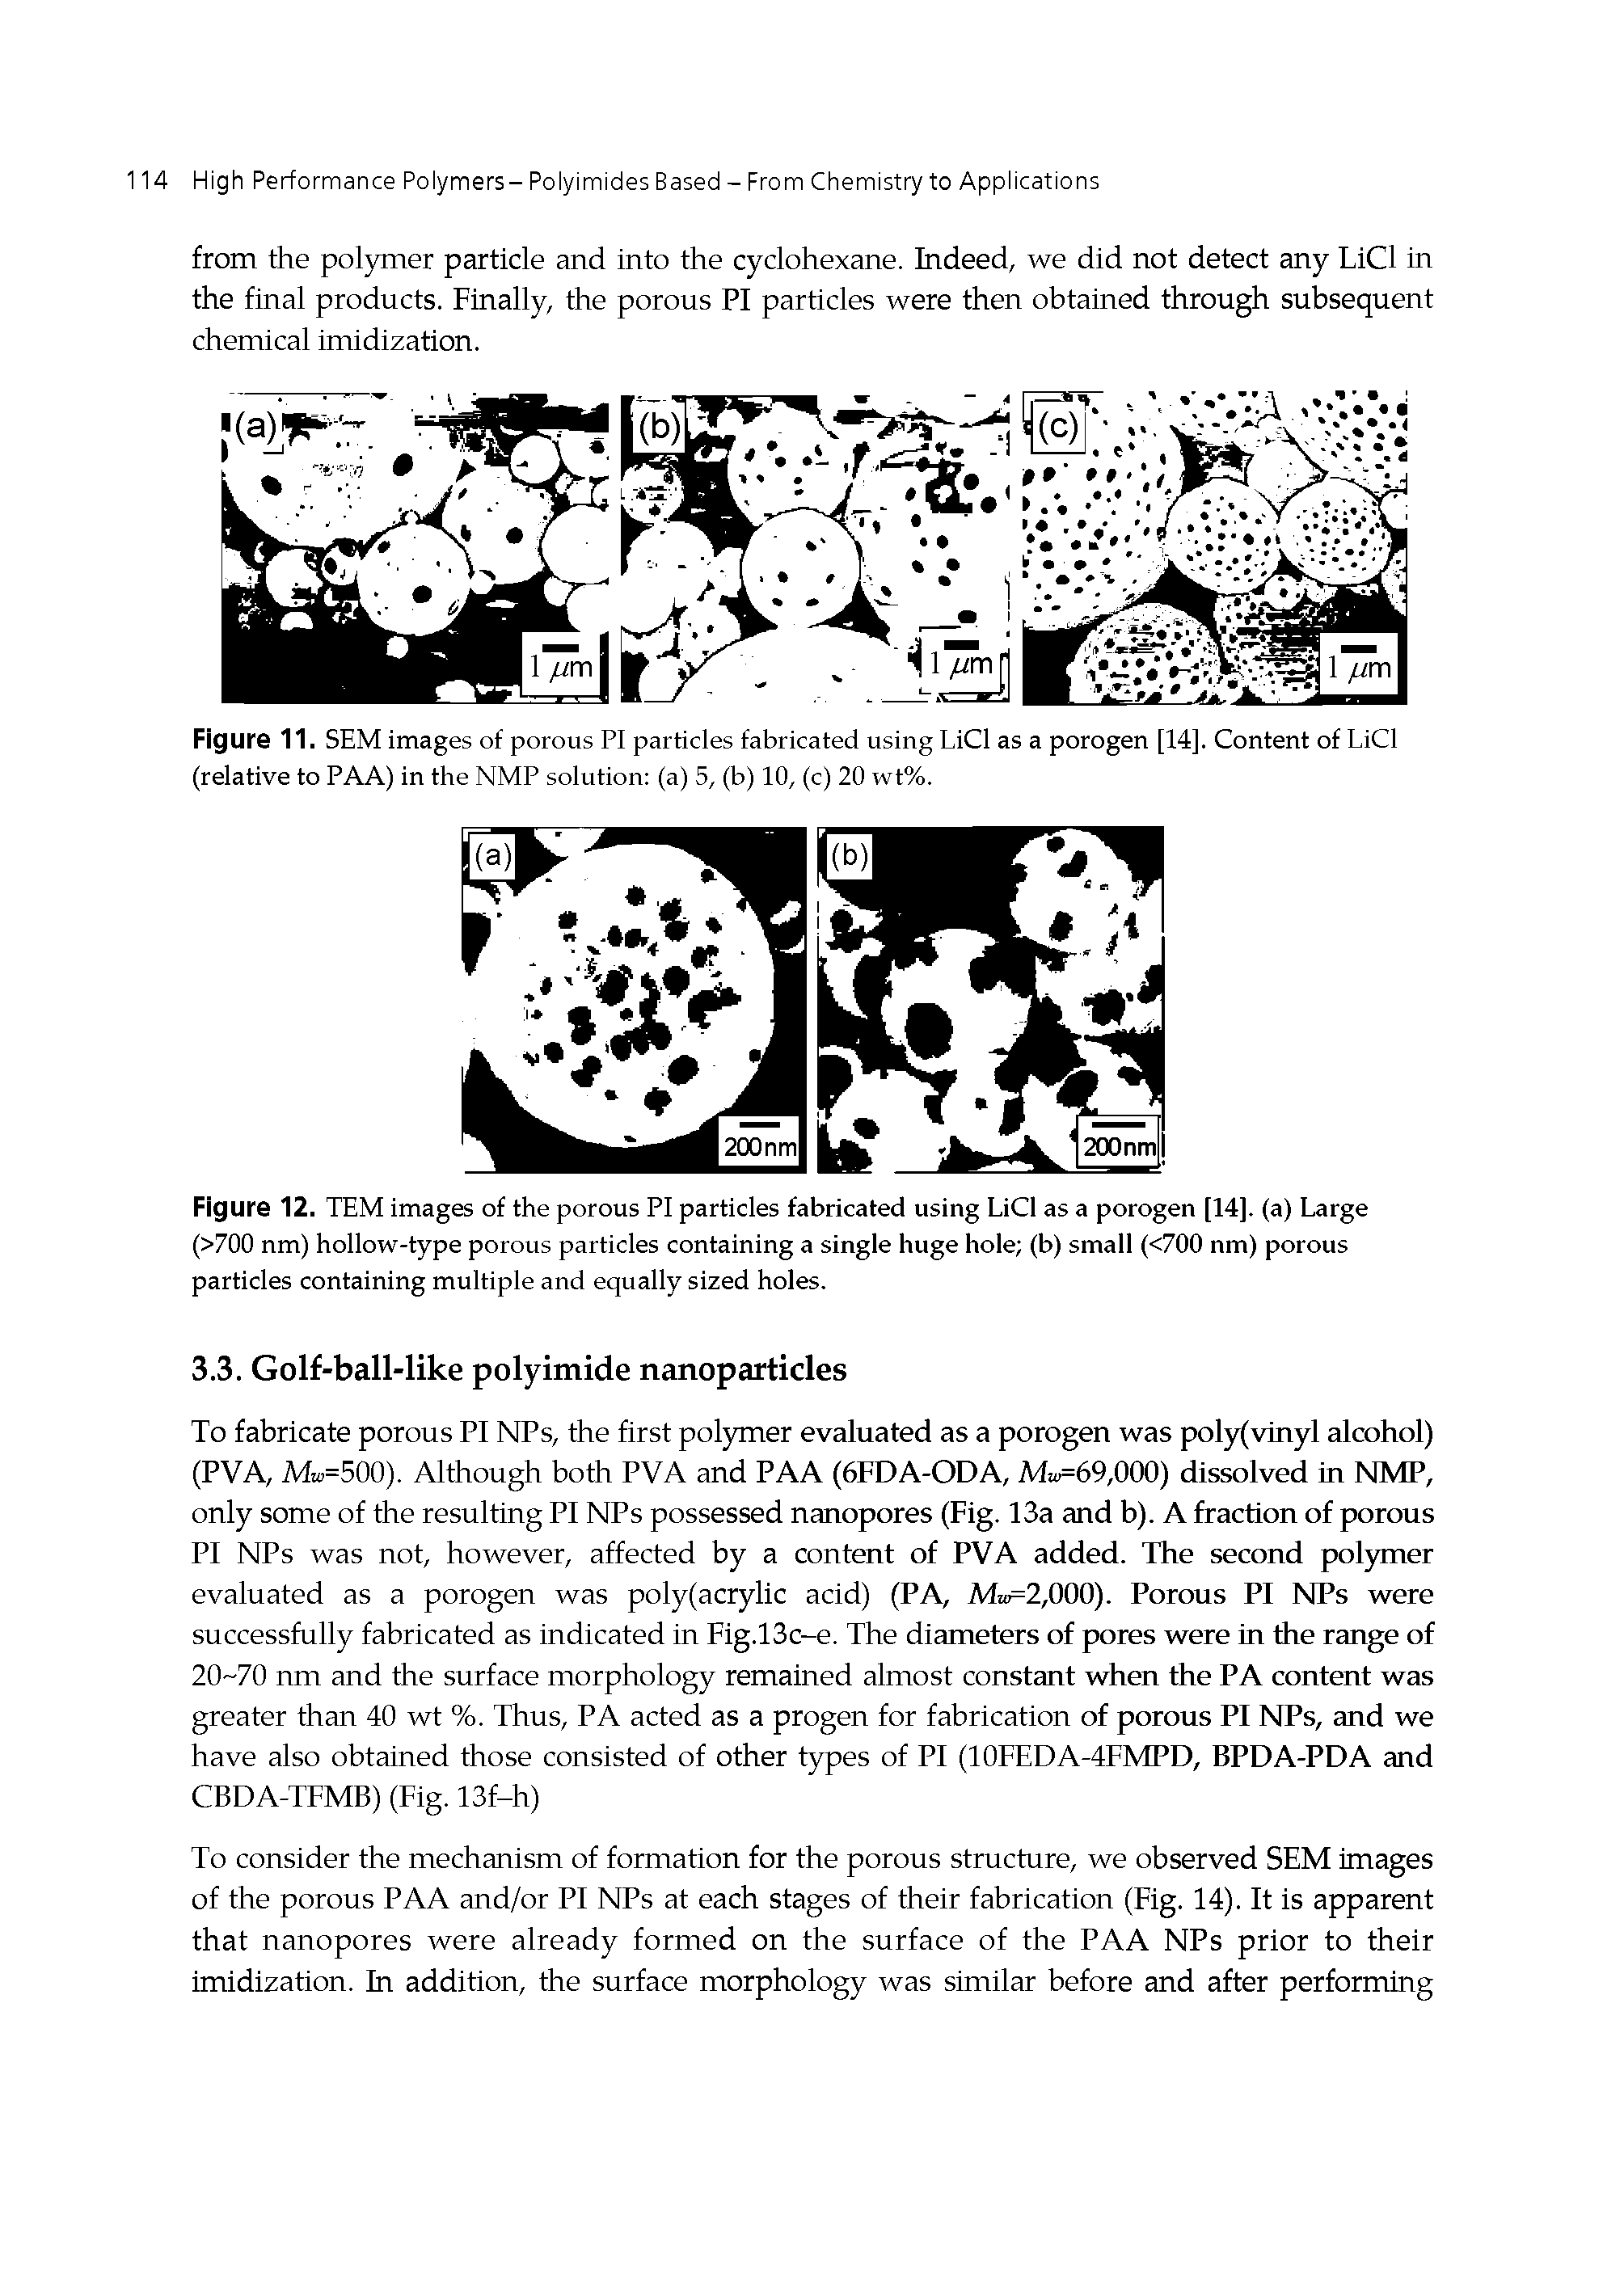 Figure 11. SEM images of porous PI particles fabricated using LiCl as a porogen [14]. Content of LiCl (relative to PAA) in the NMP solution (a) 5, (b) 10, (c) 20 wt%.